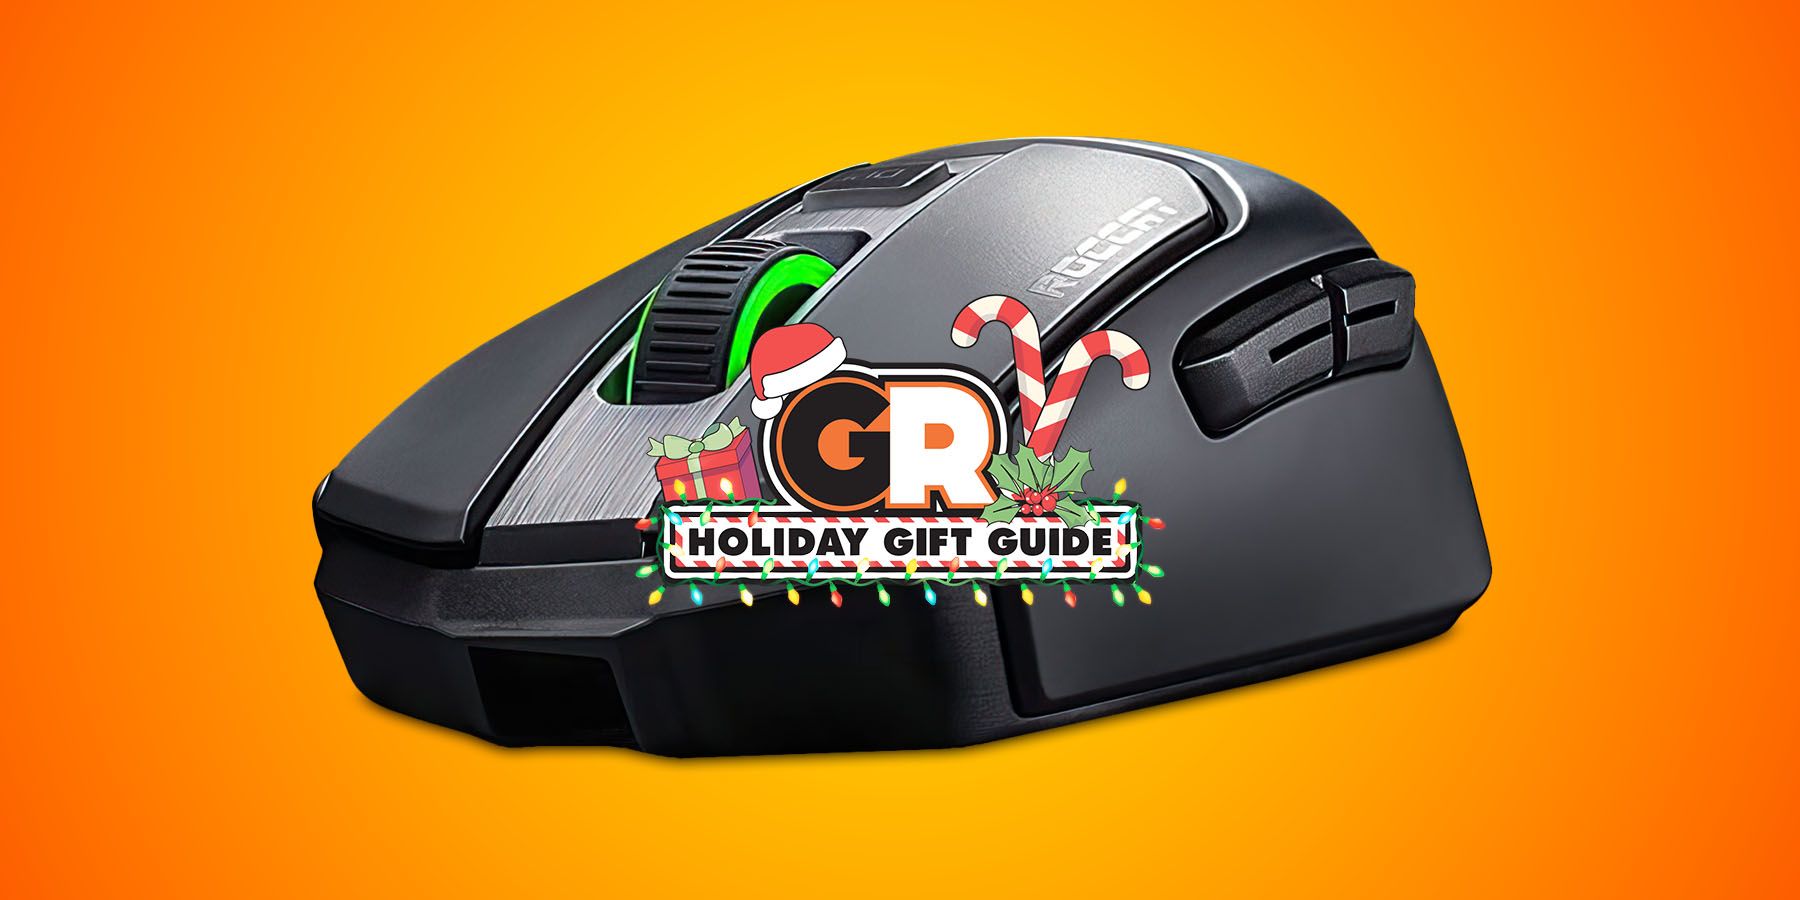 amazon holiday mice gift guide discount